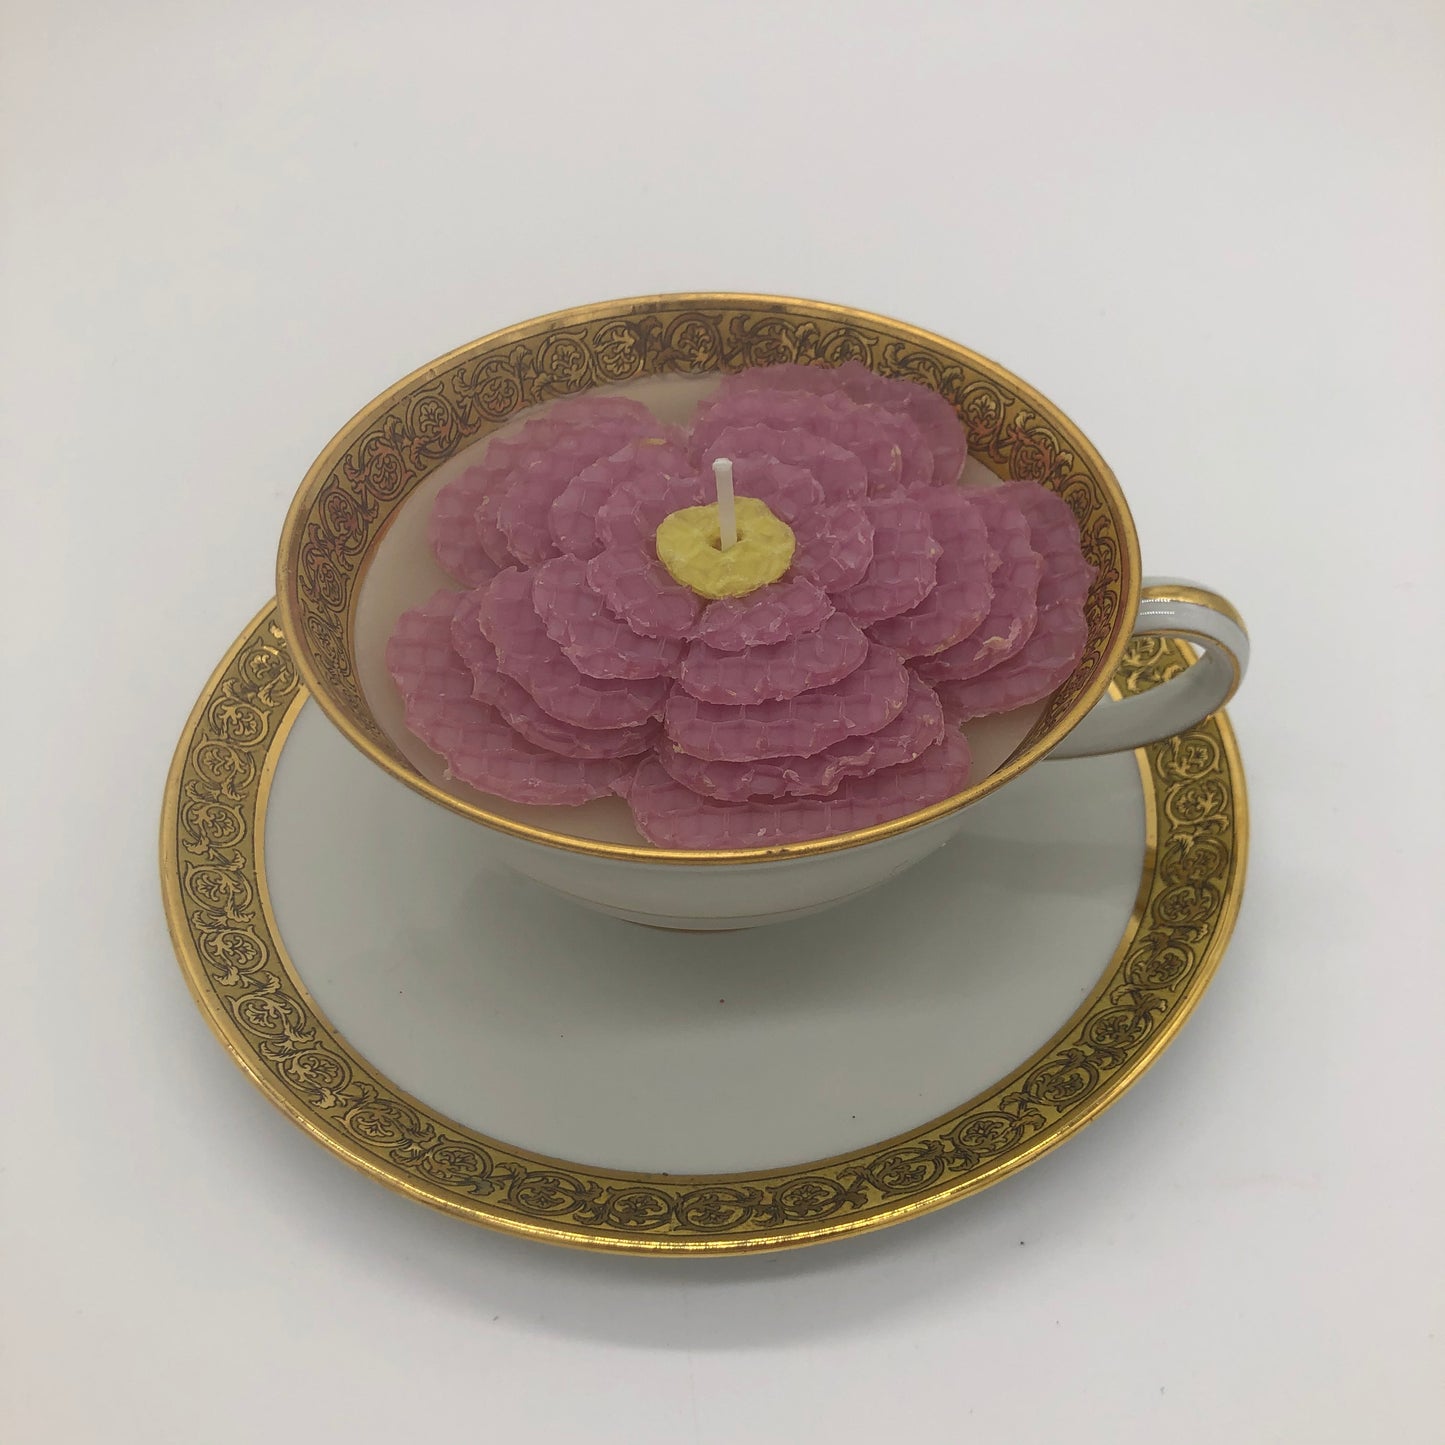 One-of-a-kind Teacup Candles (Set 11)